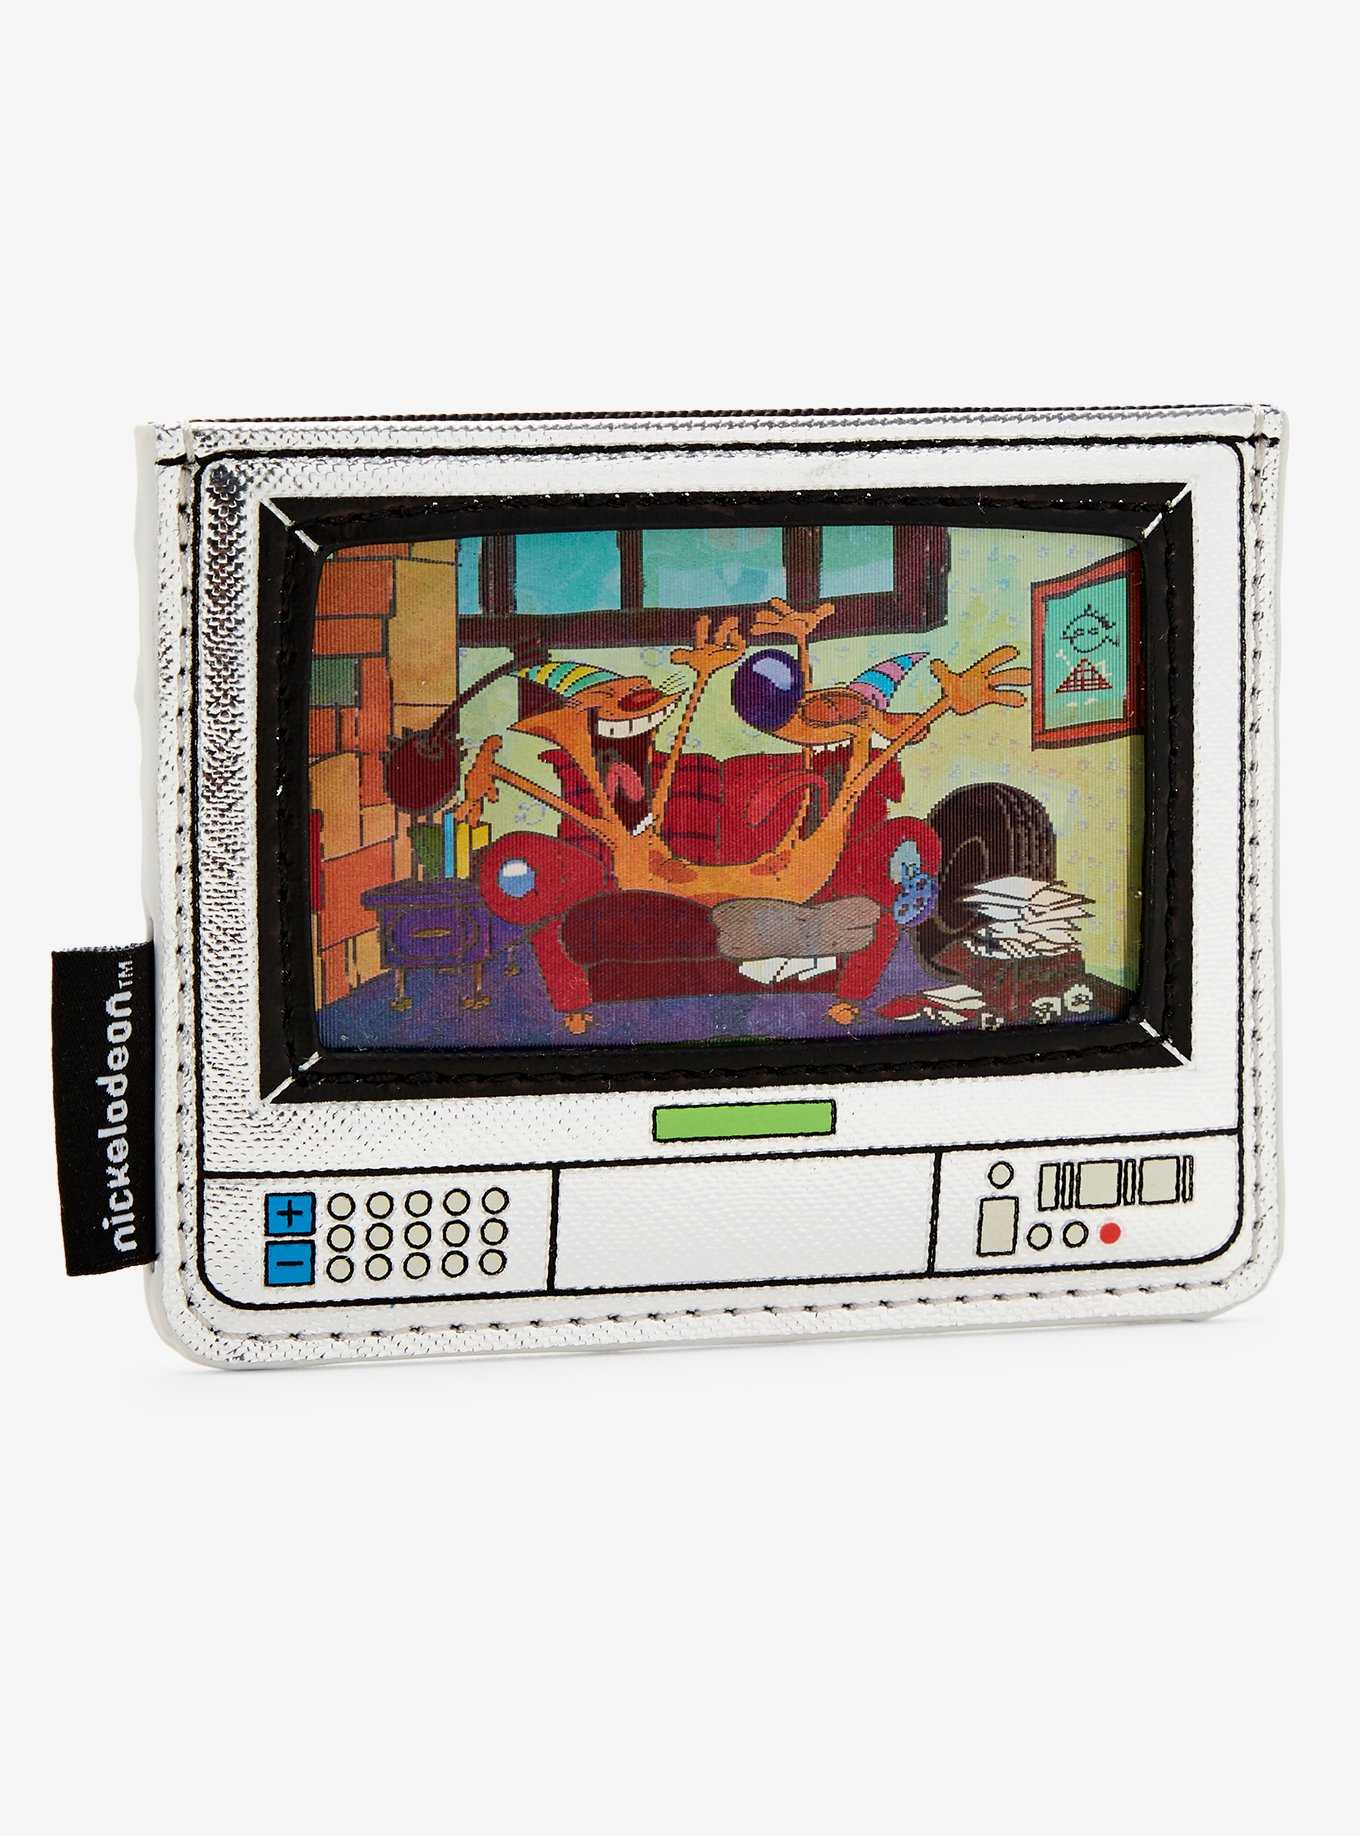 Loungefly Nickelodeon Retro TV Silver Cardholder, , hi-res